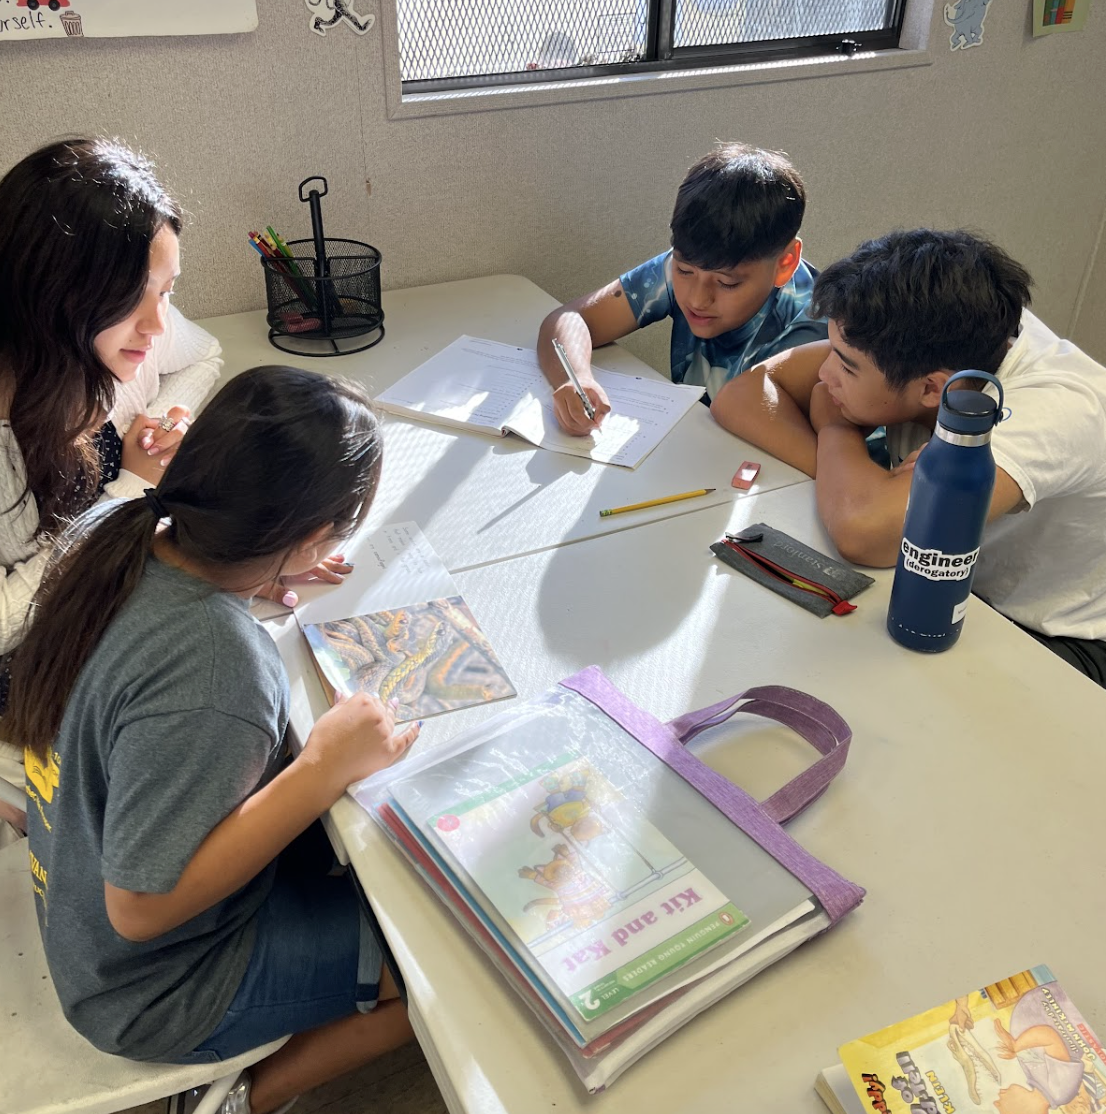 A Buena Vista Youth Scholars volunteer helps students with their homework.